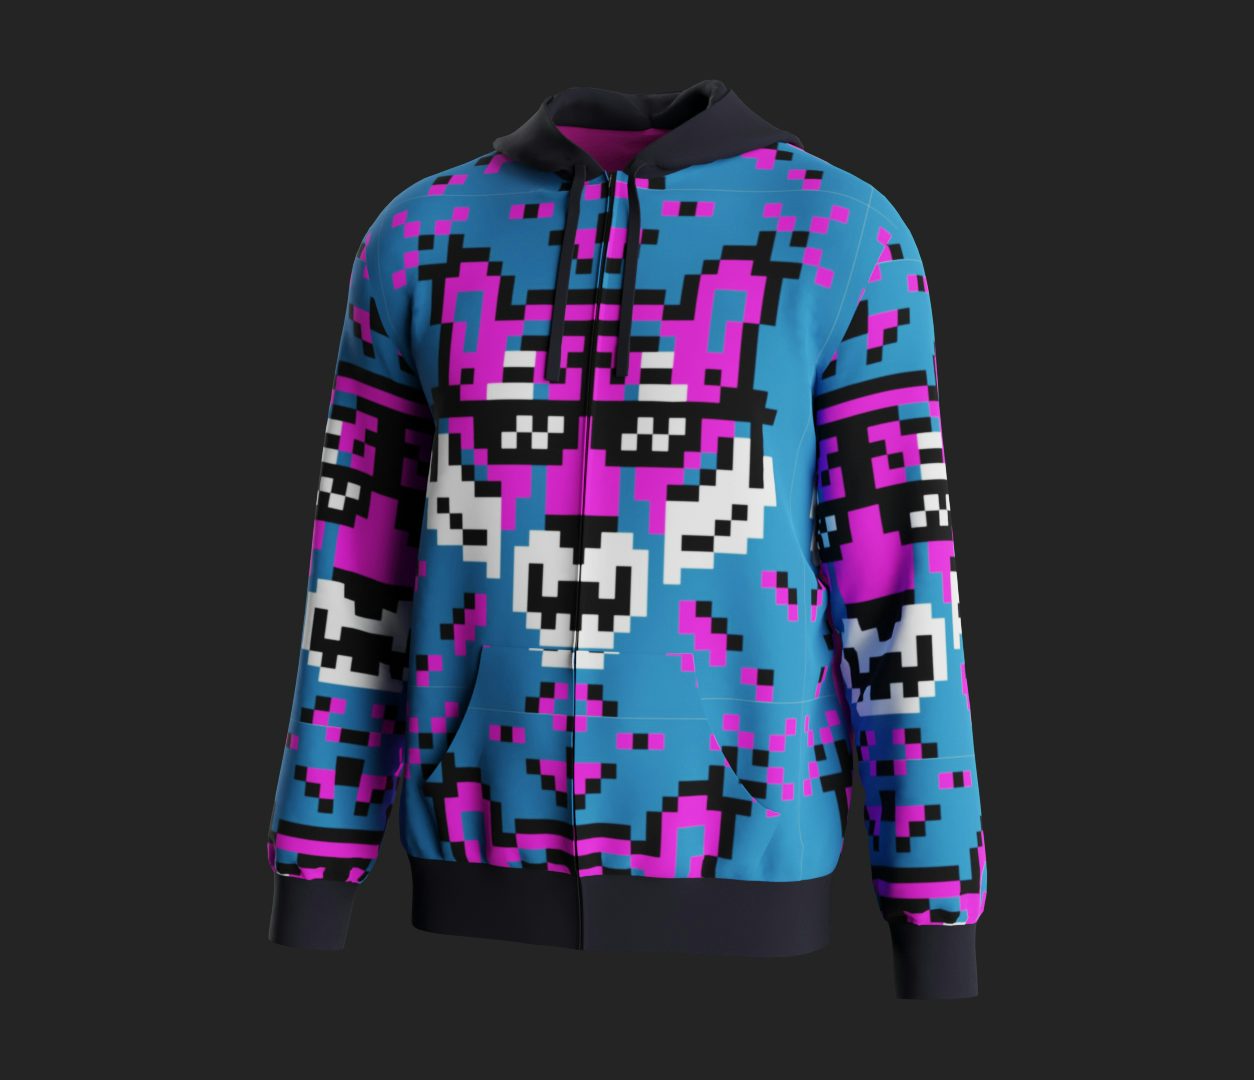 The Cool Cat hoodie in the Blitwear collection by Core3D